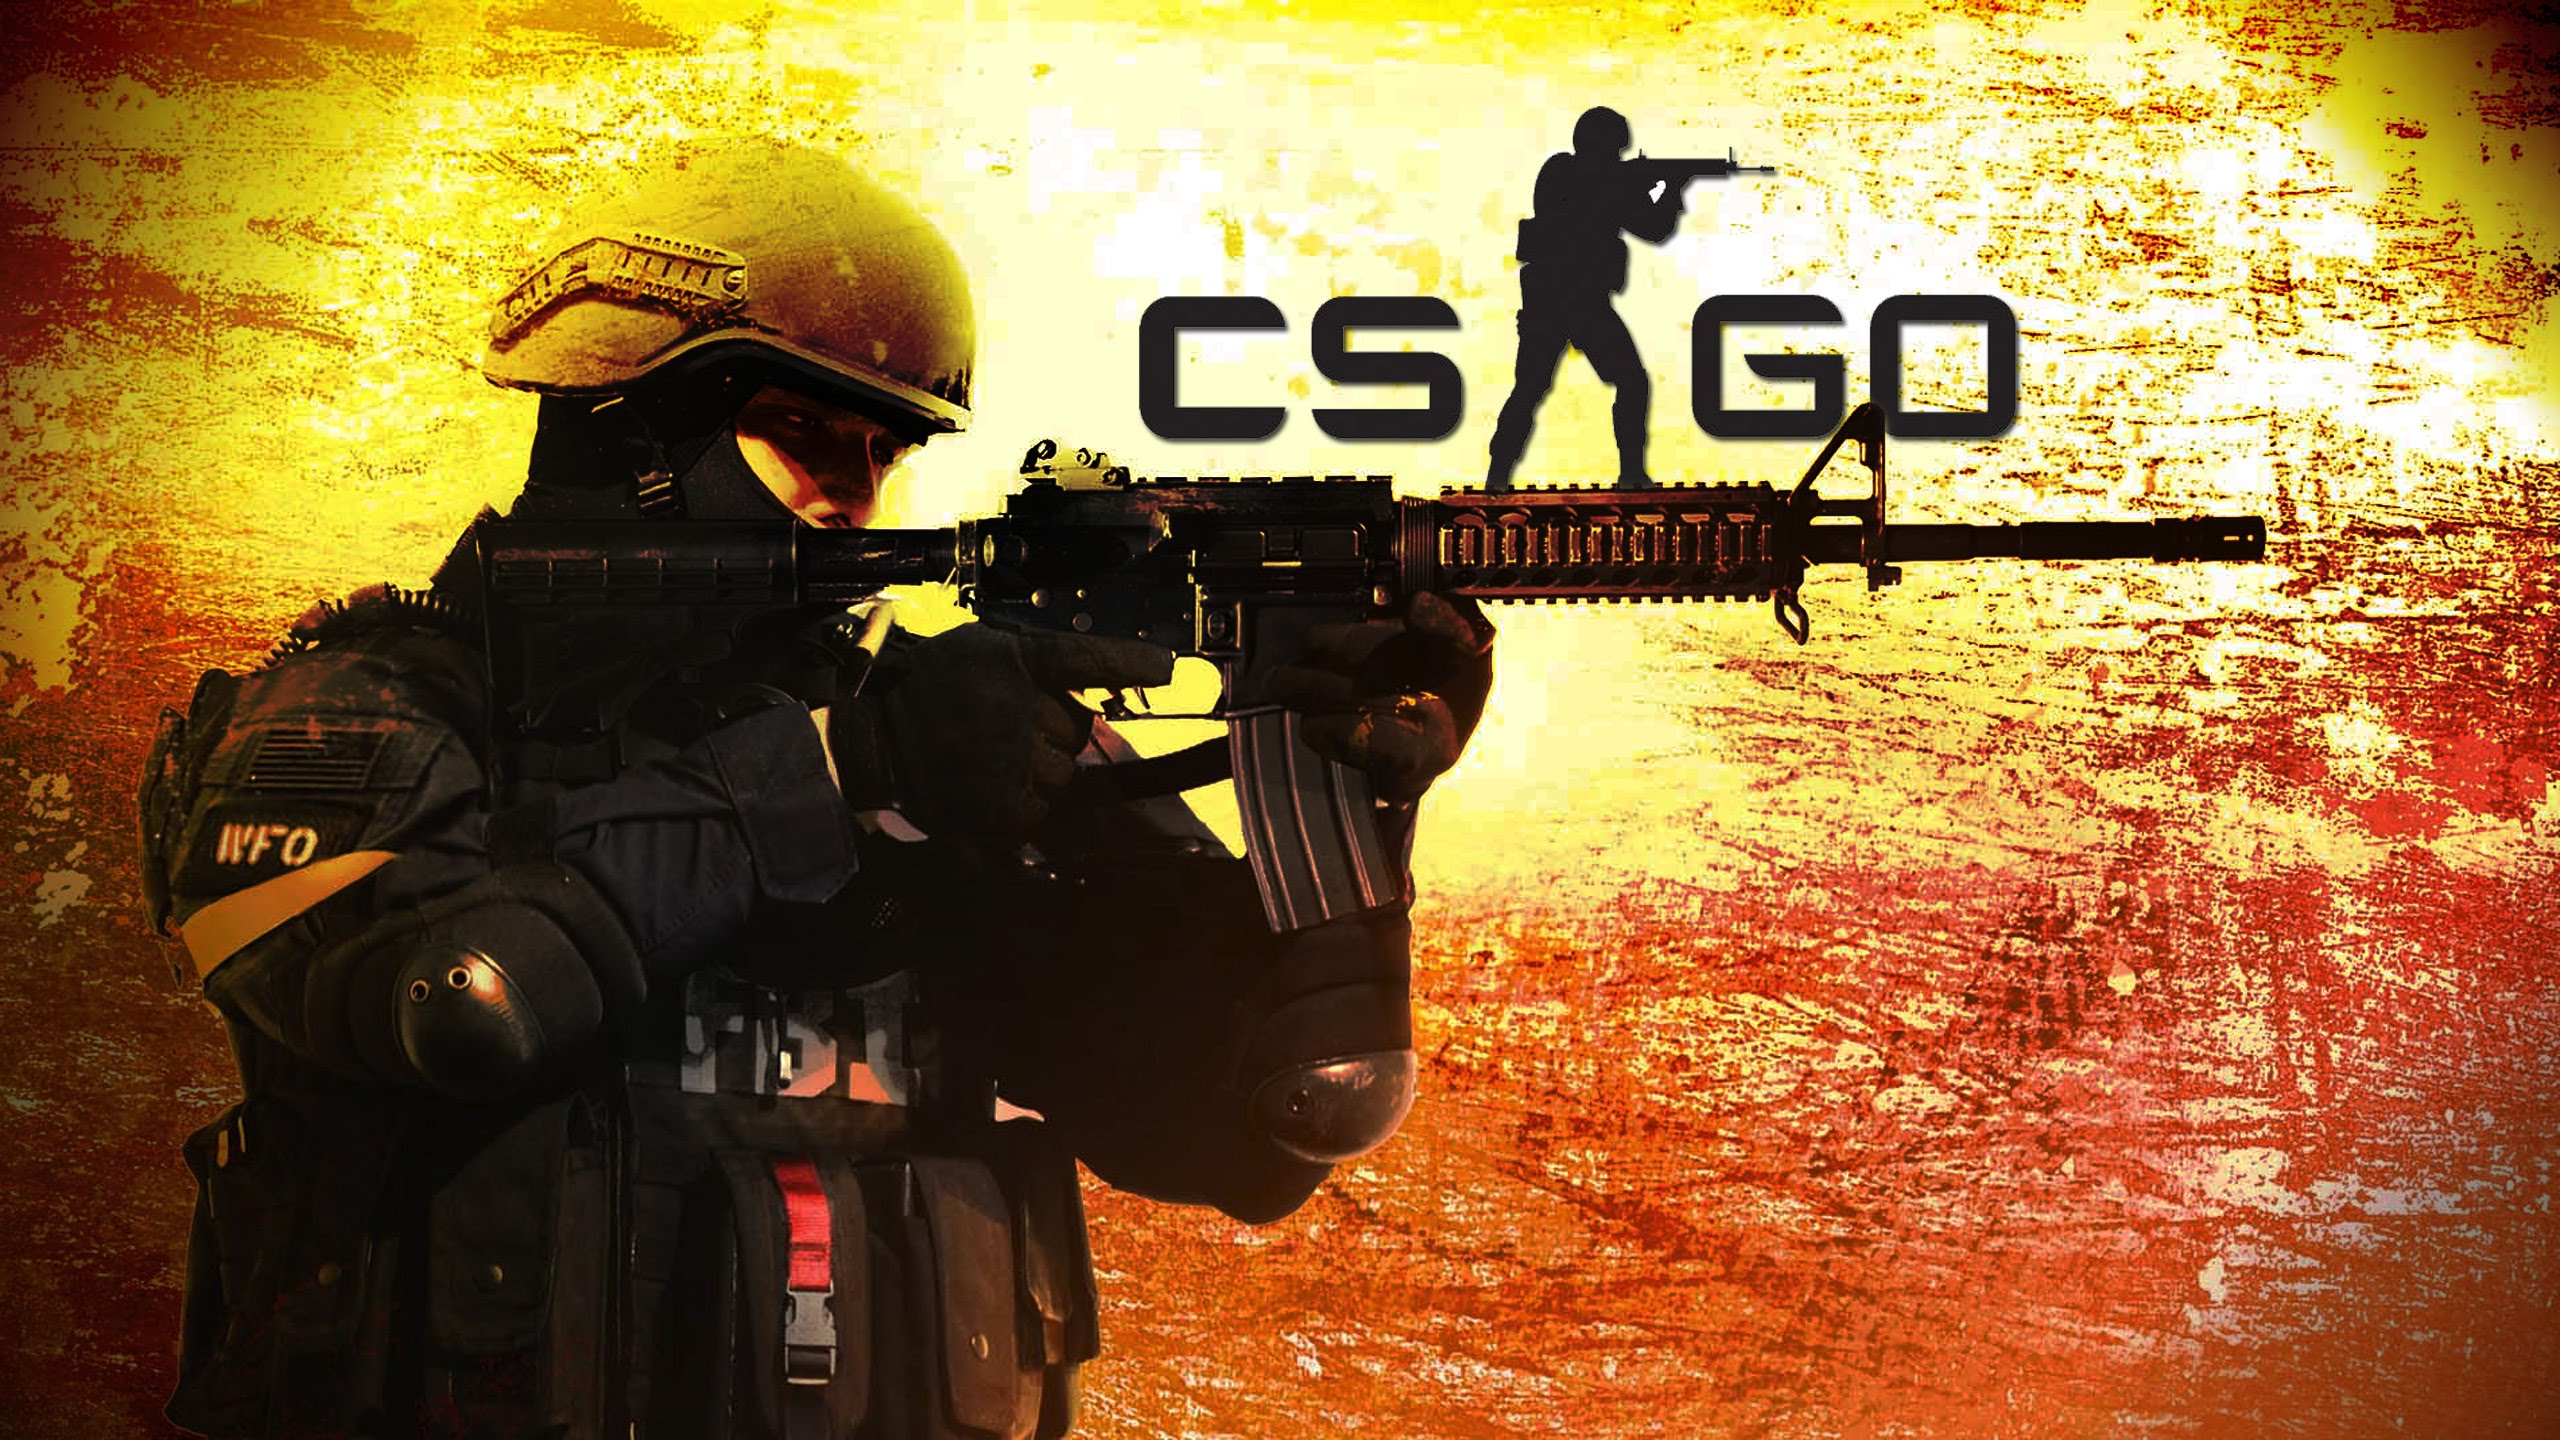 Counter-Strike: Global Offensive Wallpapers